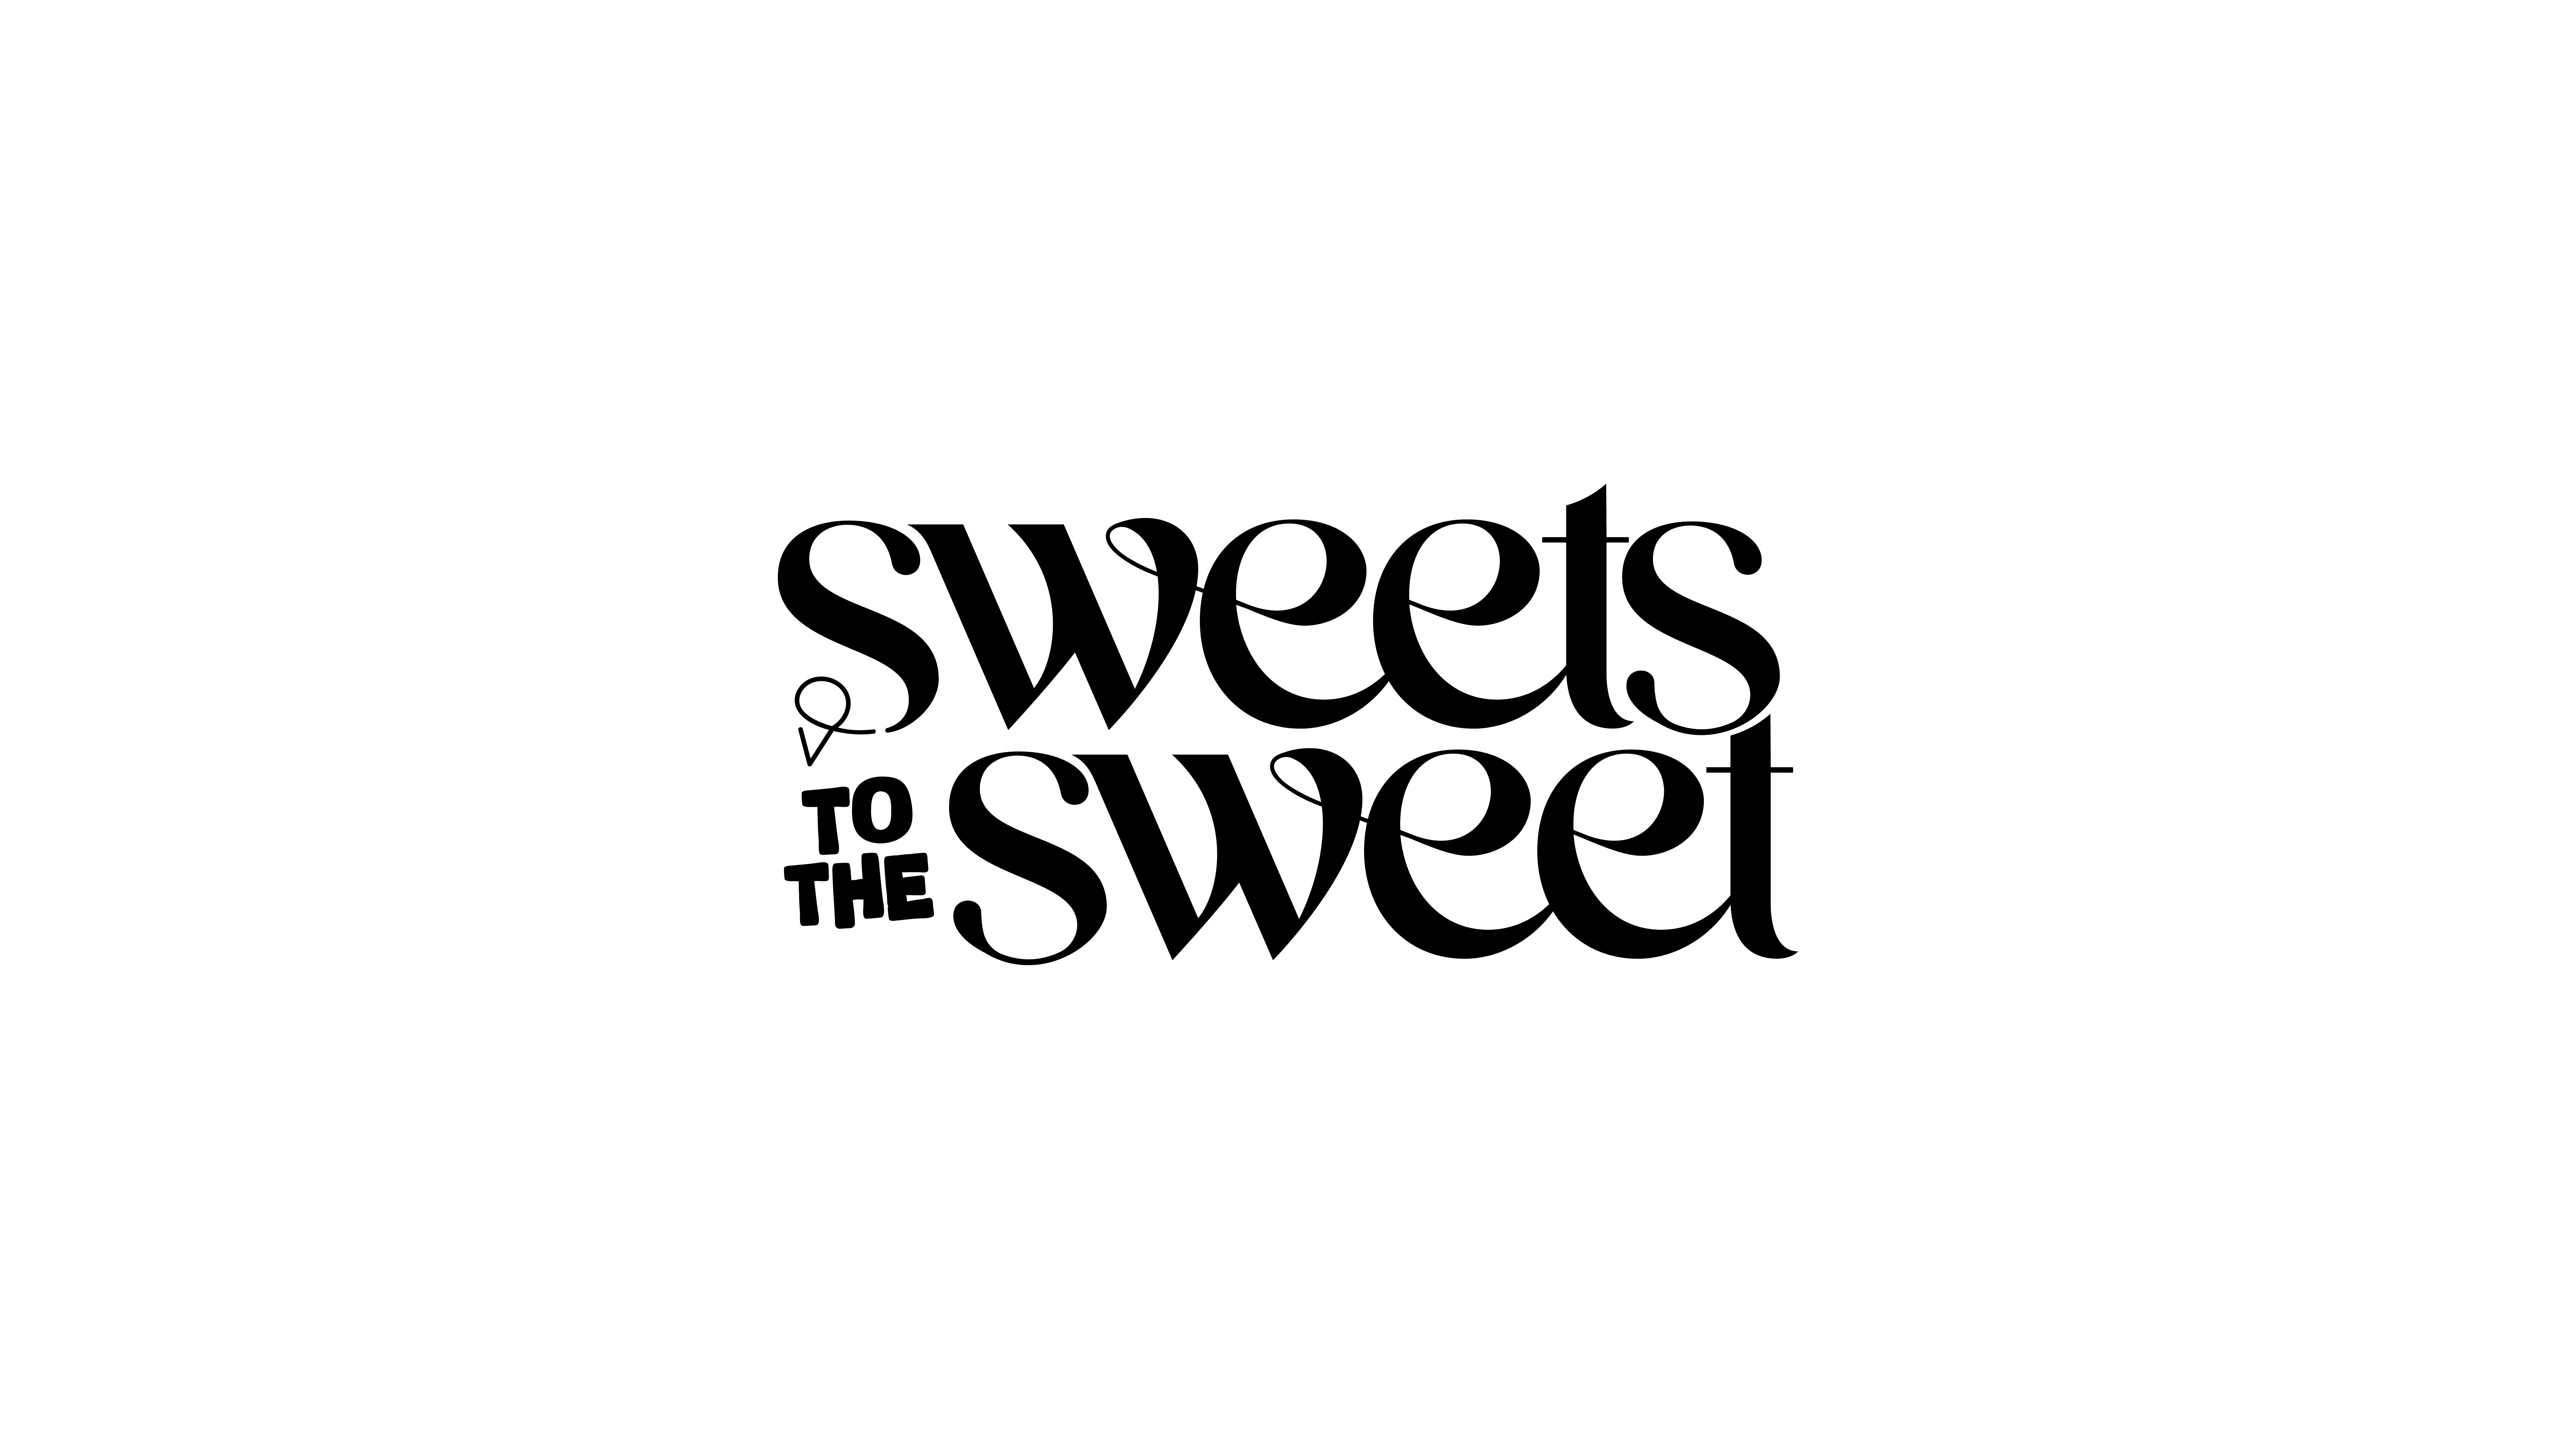 SWEETS TO THE SWEET